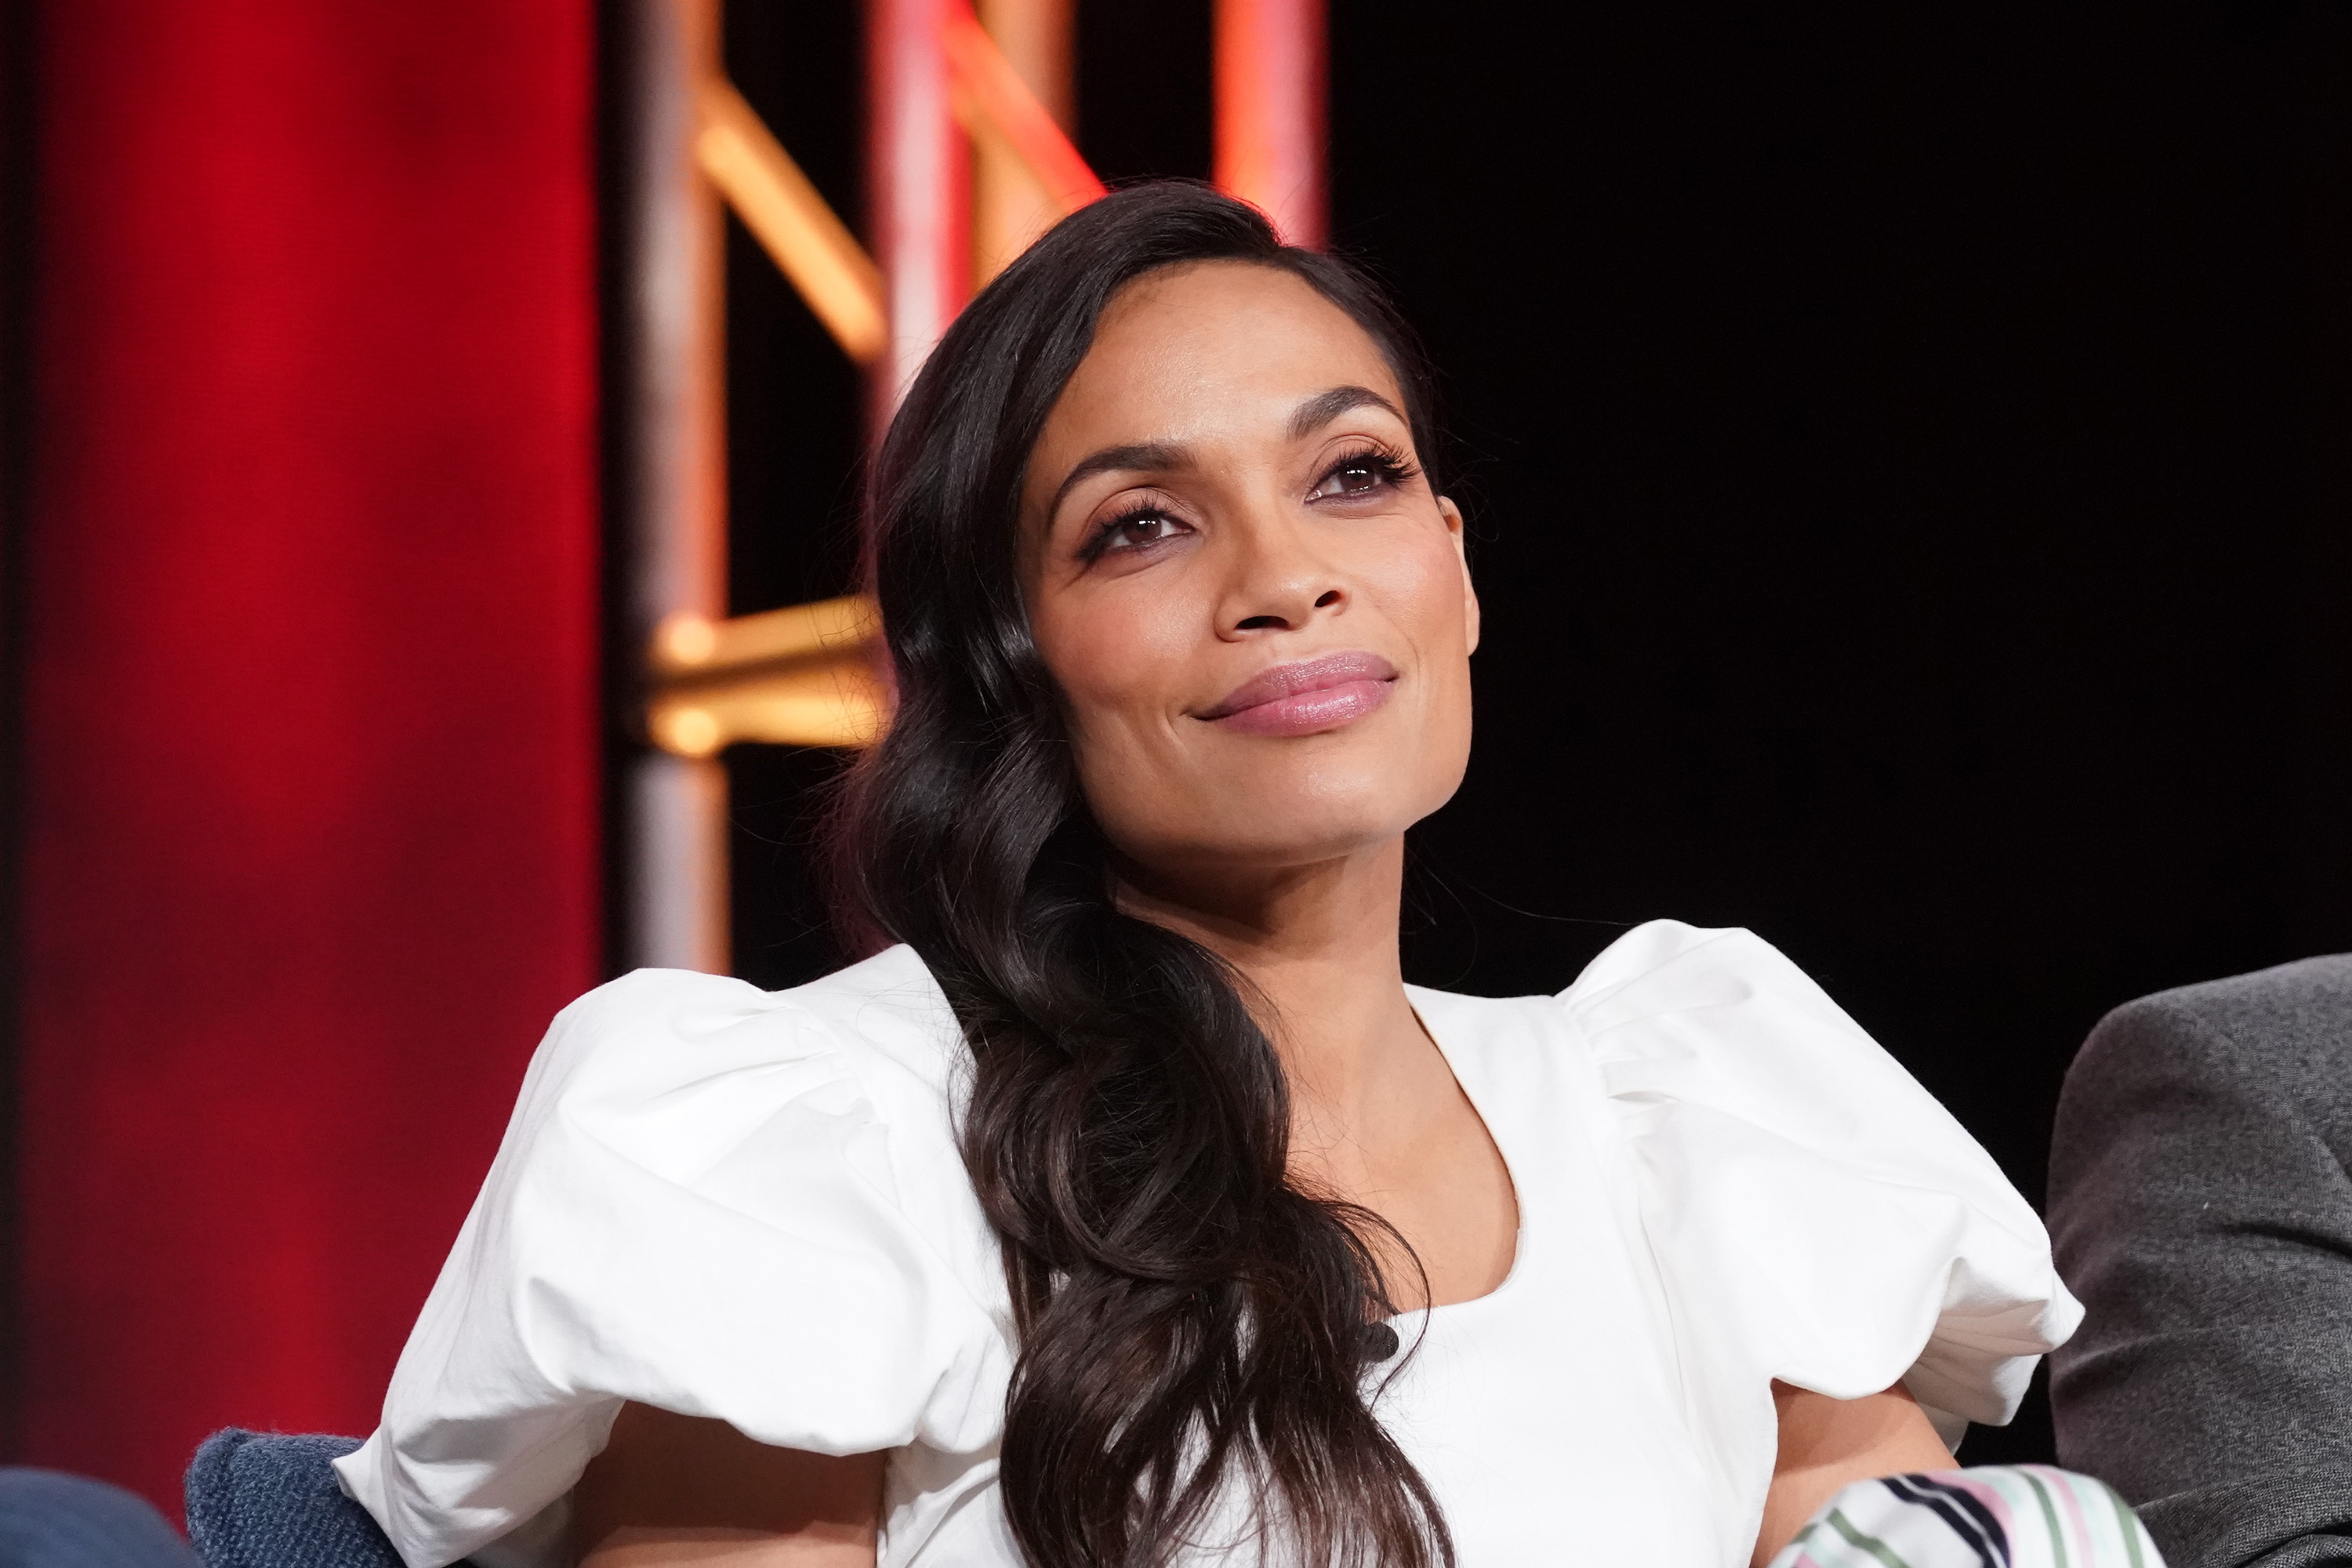 Rosario Dawson, in a white blouse, during the press tour for her show 'Briarpatch.'